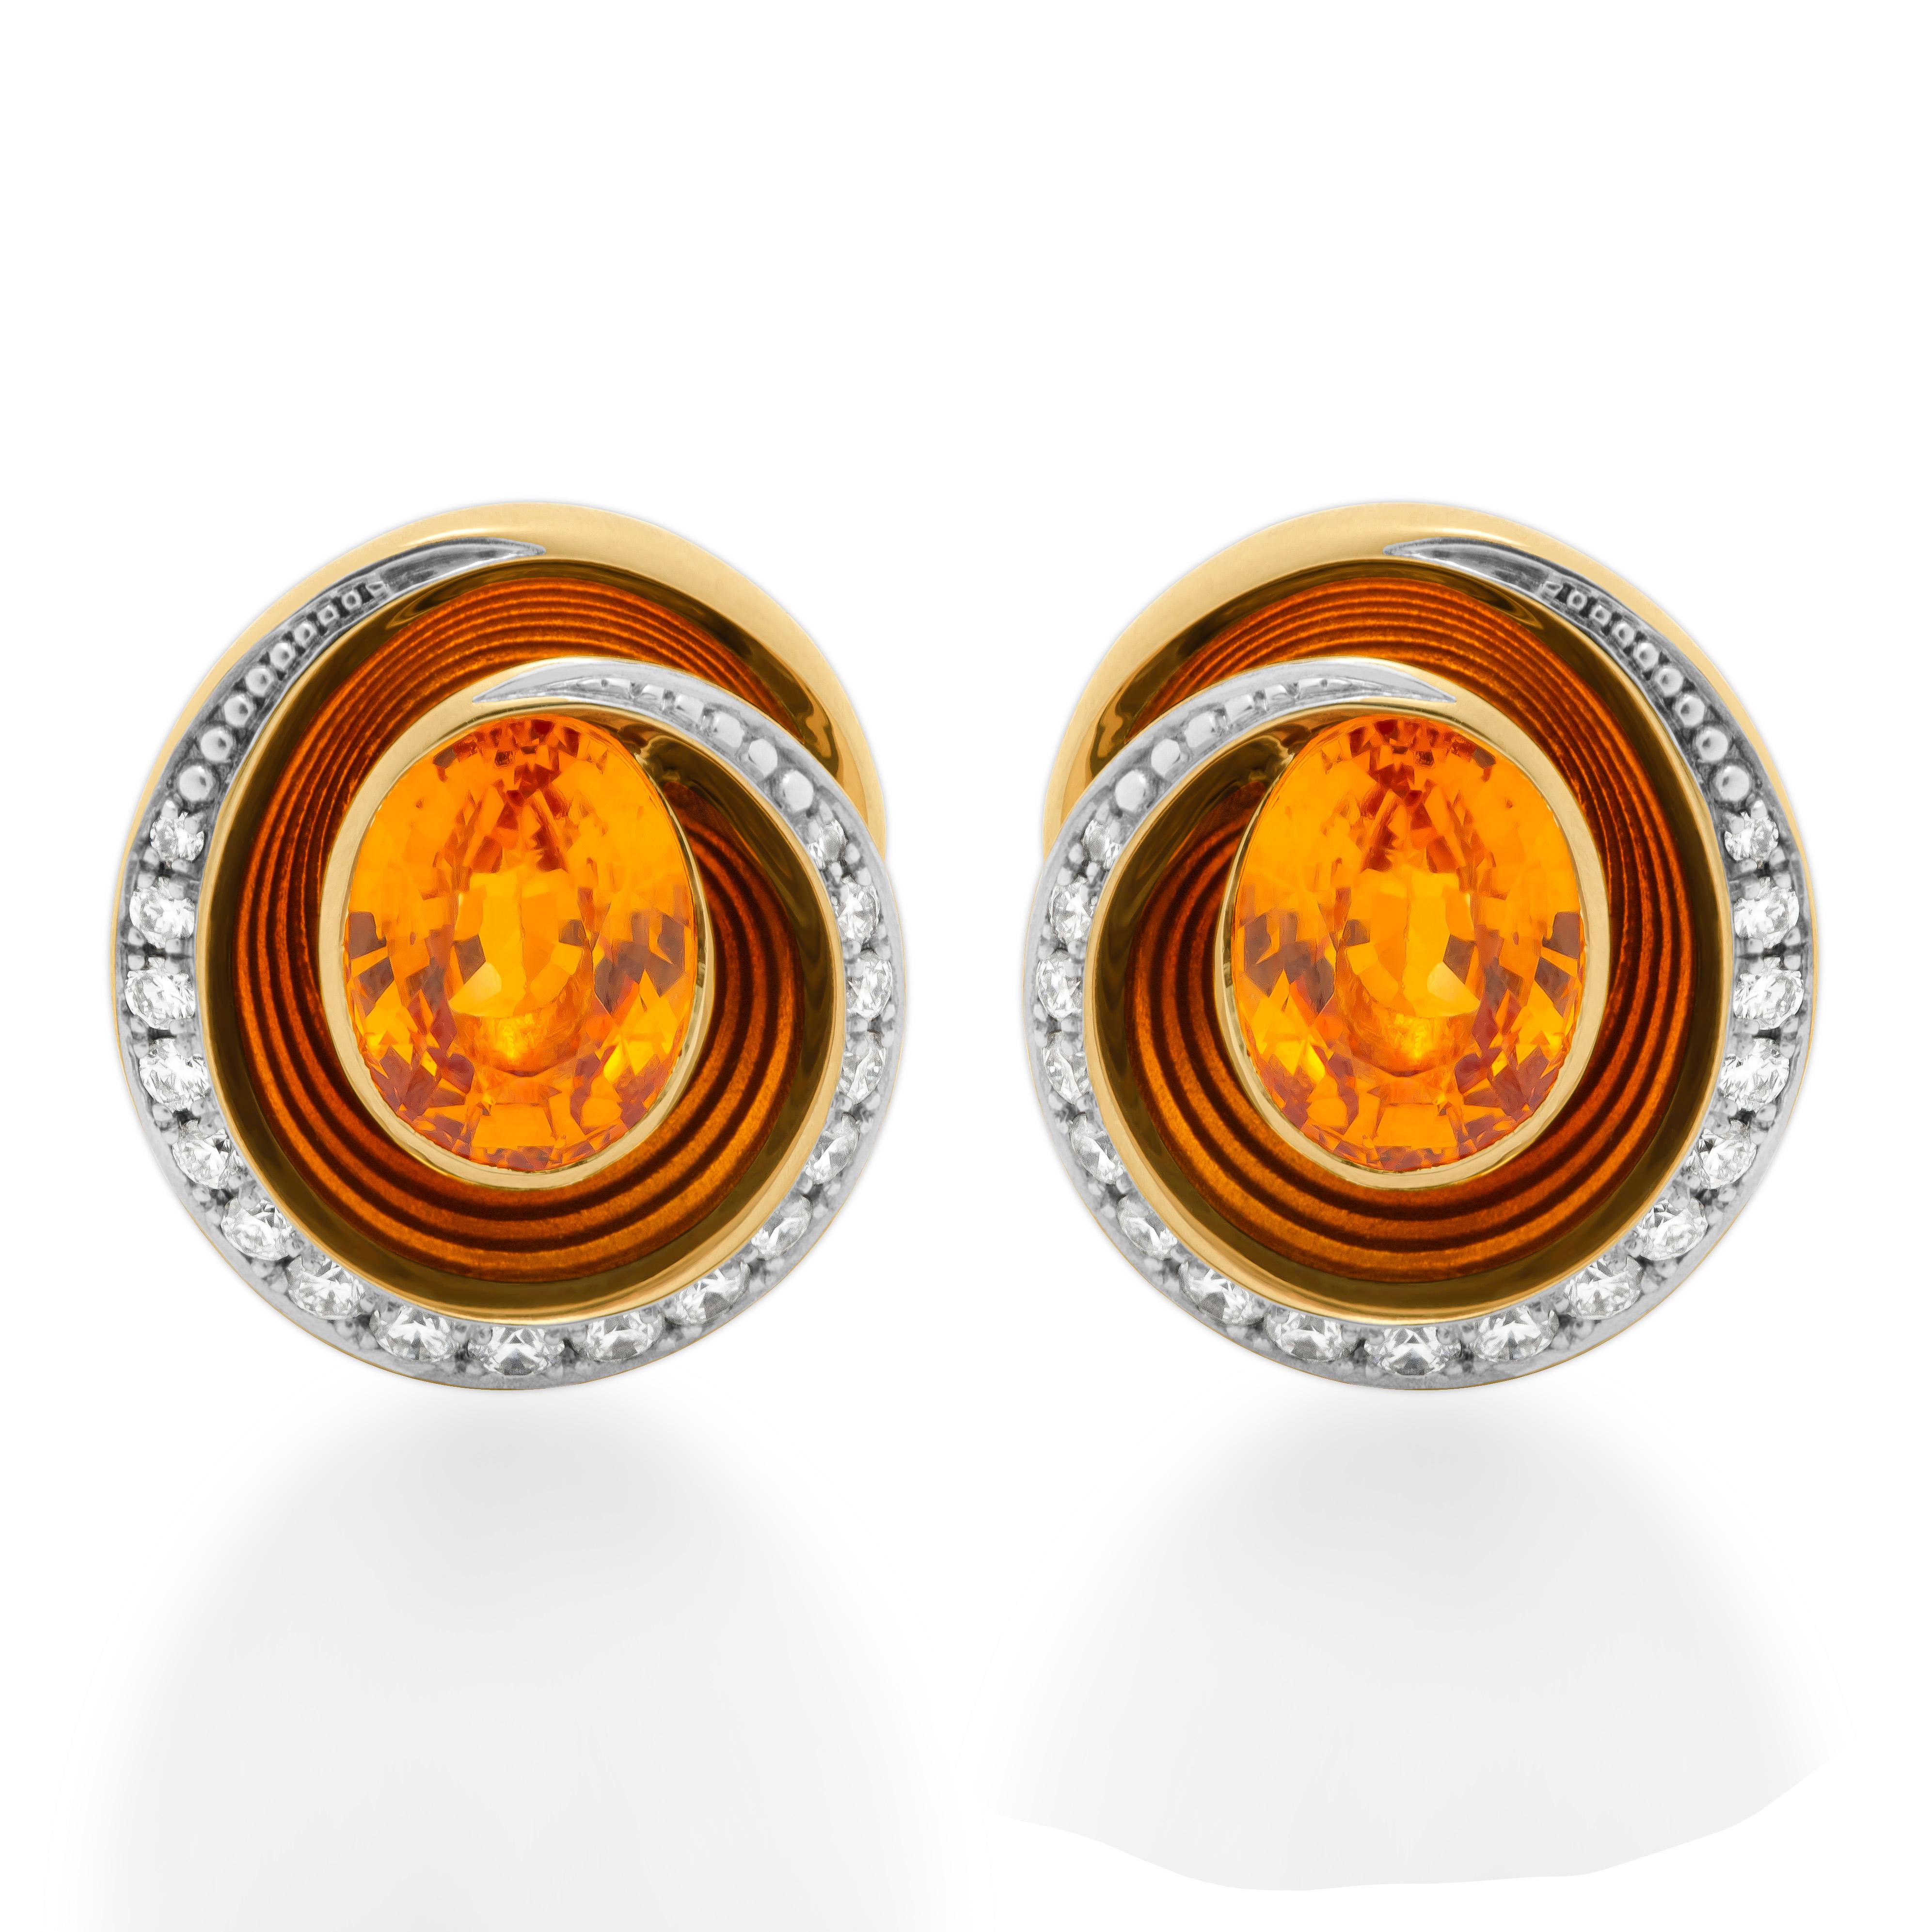 Spessartine Diamonds Enamel 18 Karat Yellow Gold Melted Colors Earrings
Our new collection 